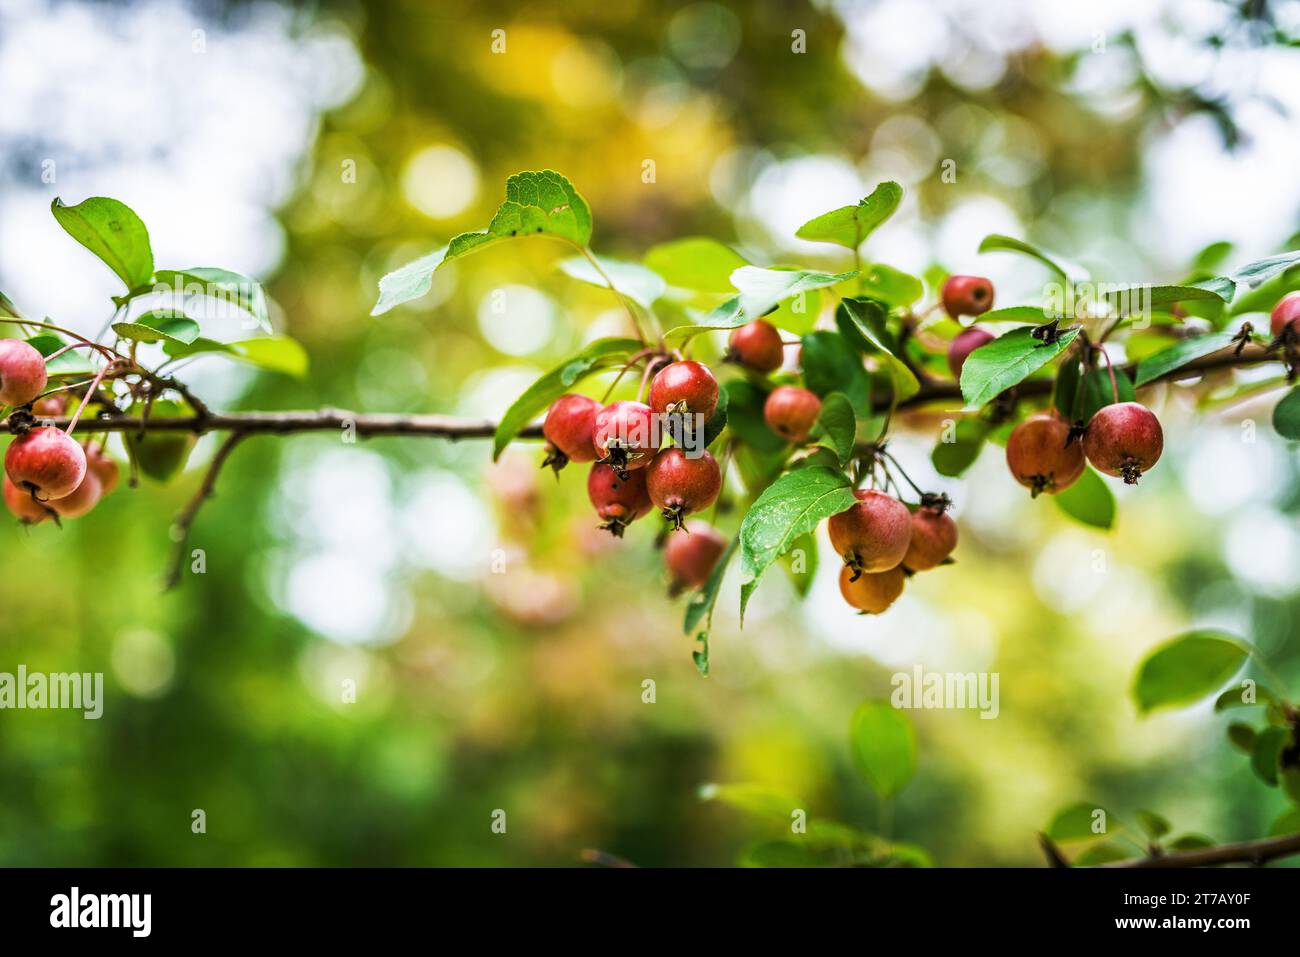 Malus sylvestris, the European crab apple, is a species of the genus Malus, native to Europe. Its scientific name means forest apple, and the truly wi Stock Photo